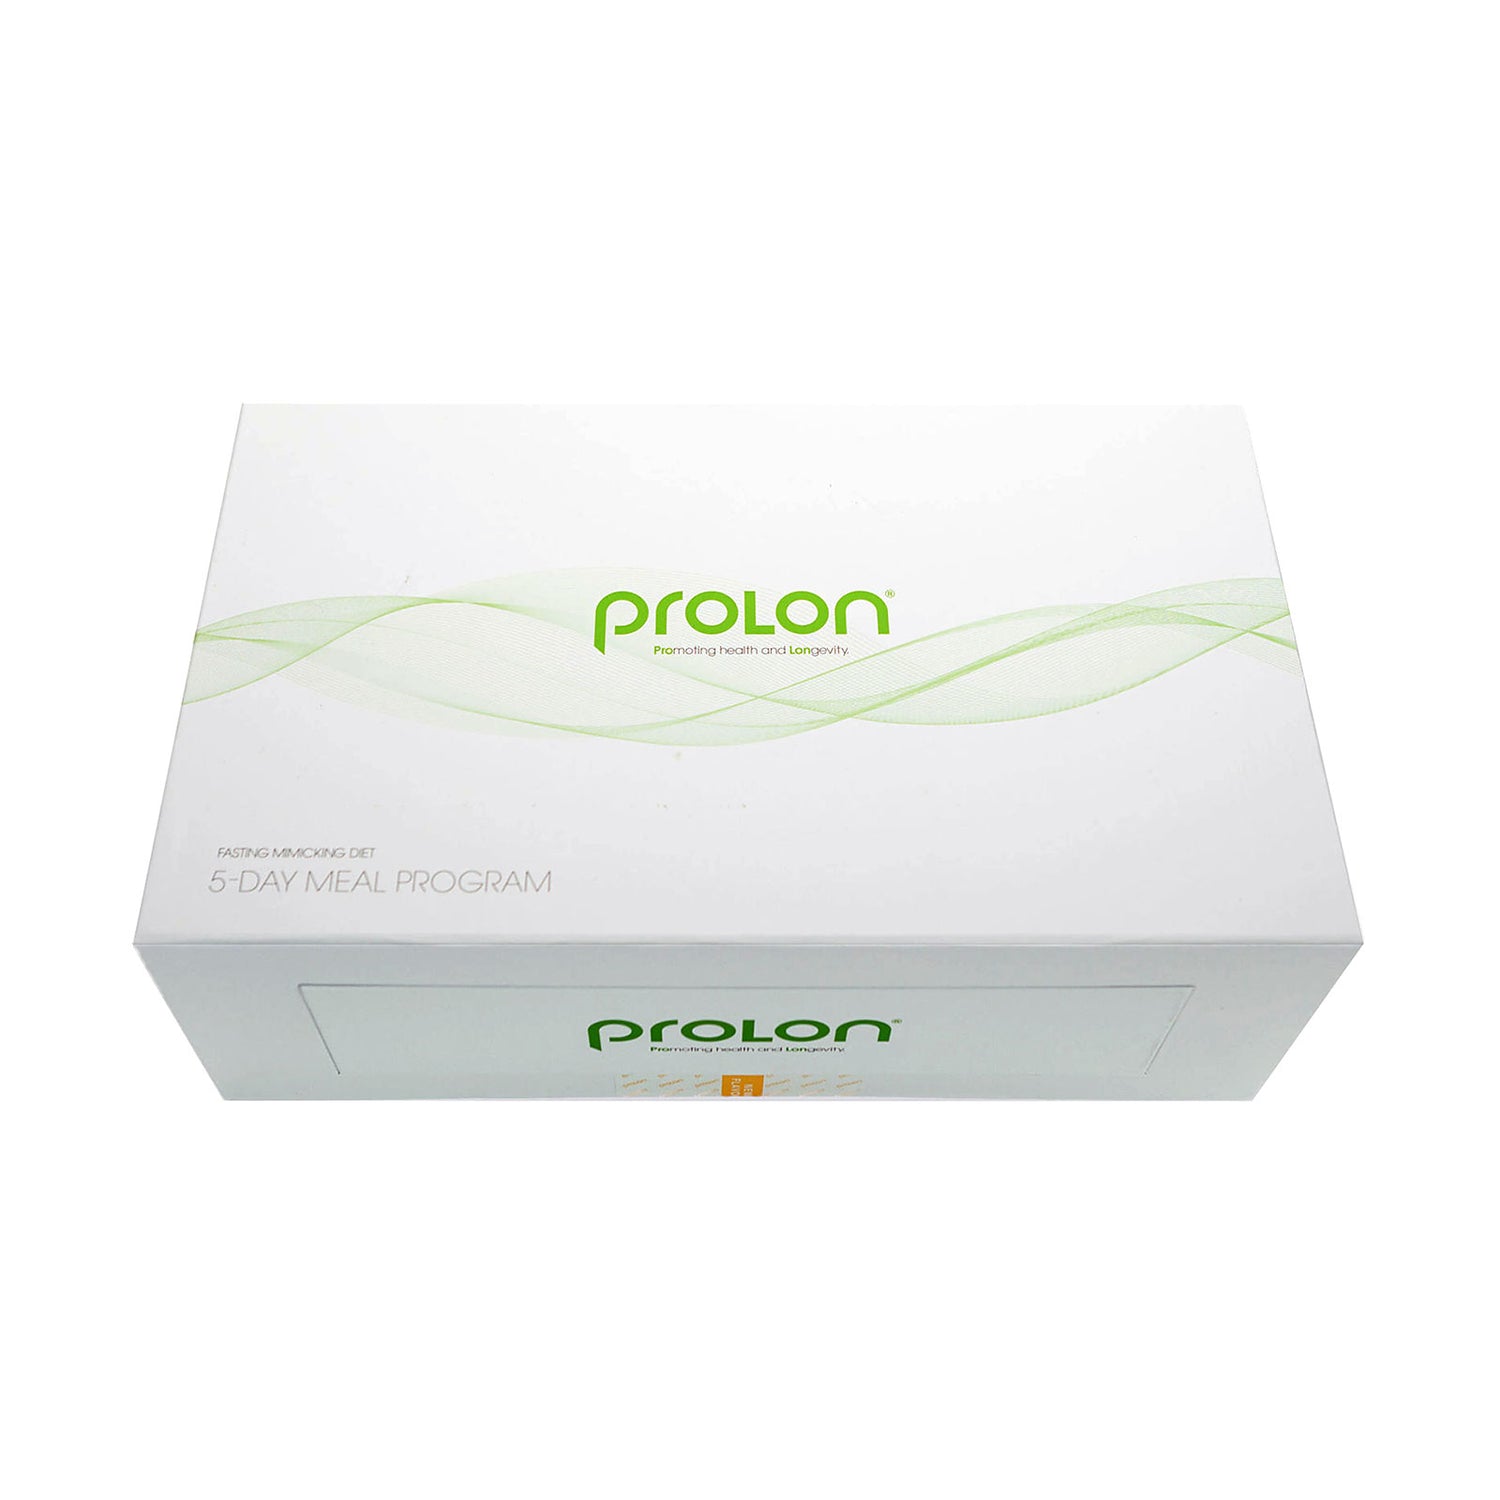 ProLon Fasting Mimicking Diet 5-Day Meal Program